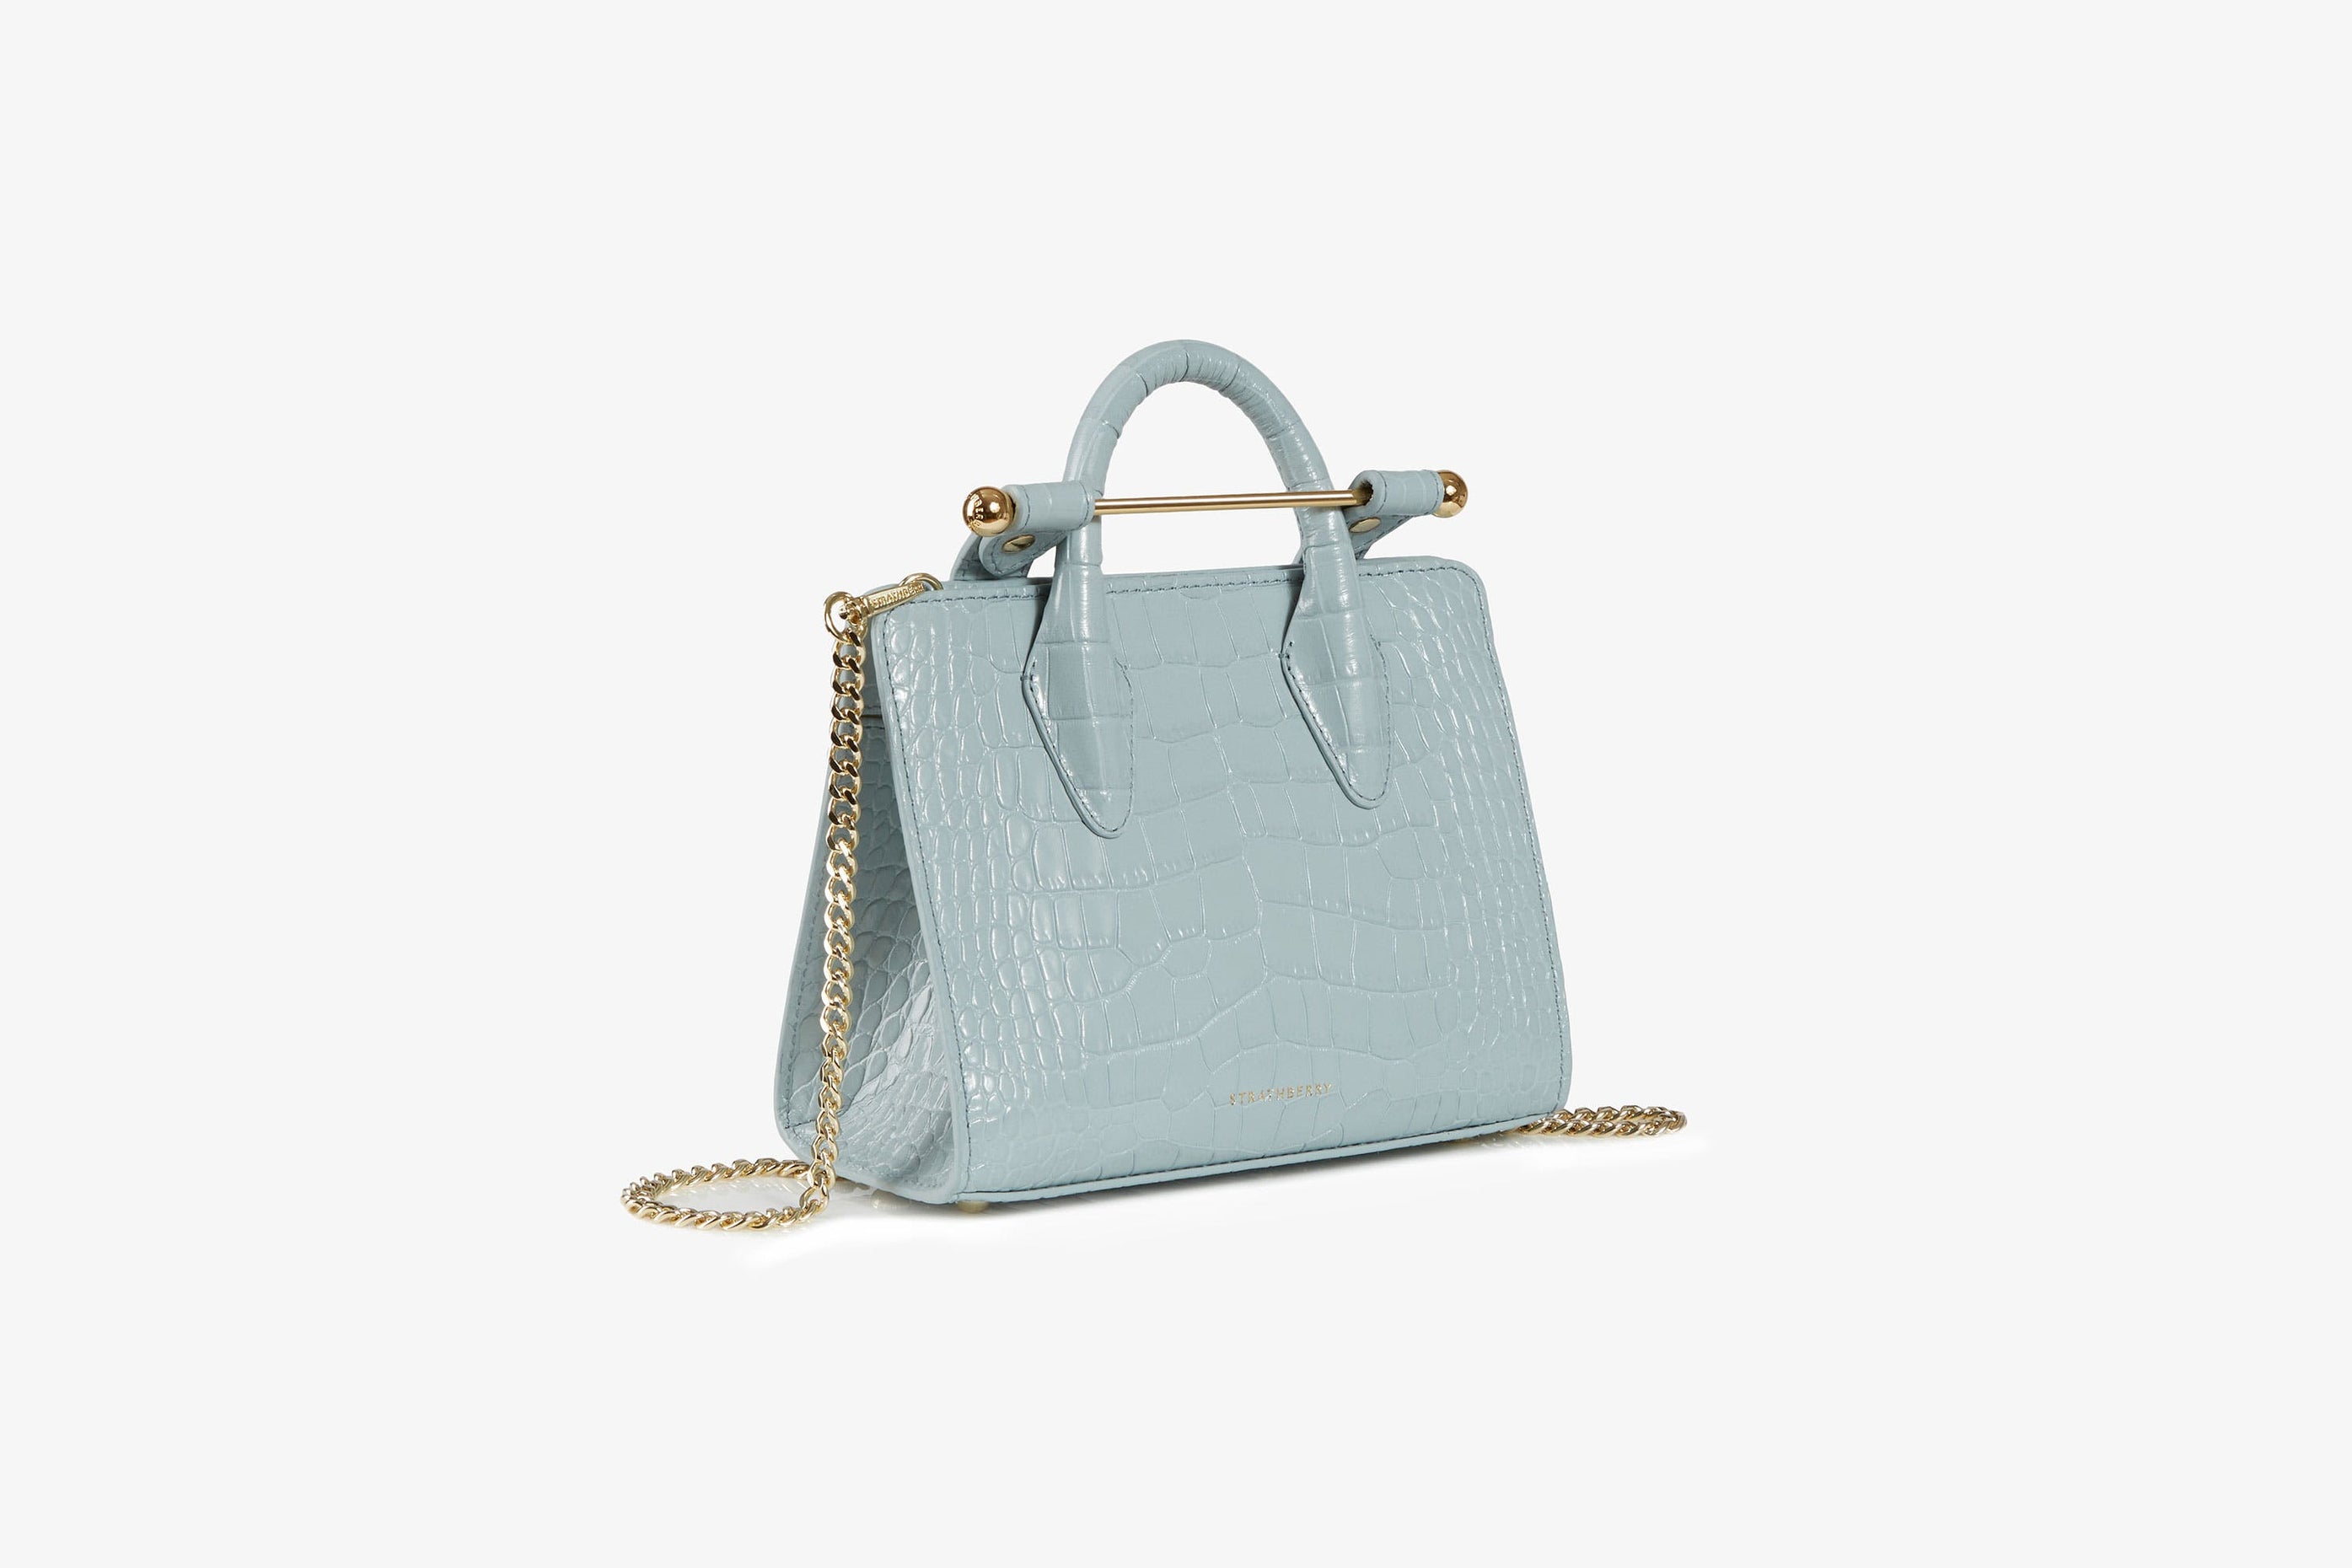 A view showcasing our The Strathberry Nano Tote - Croc-Embossed Leather Duck Egg Blue